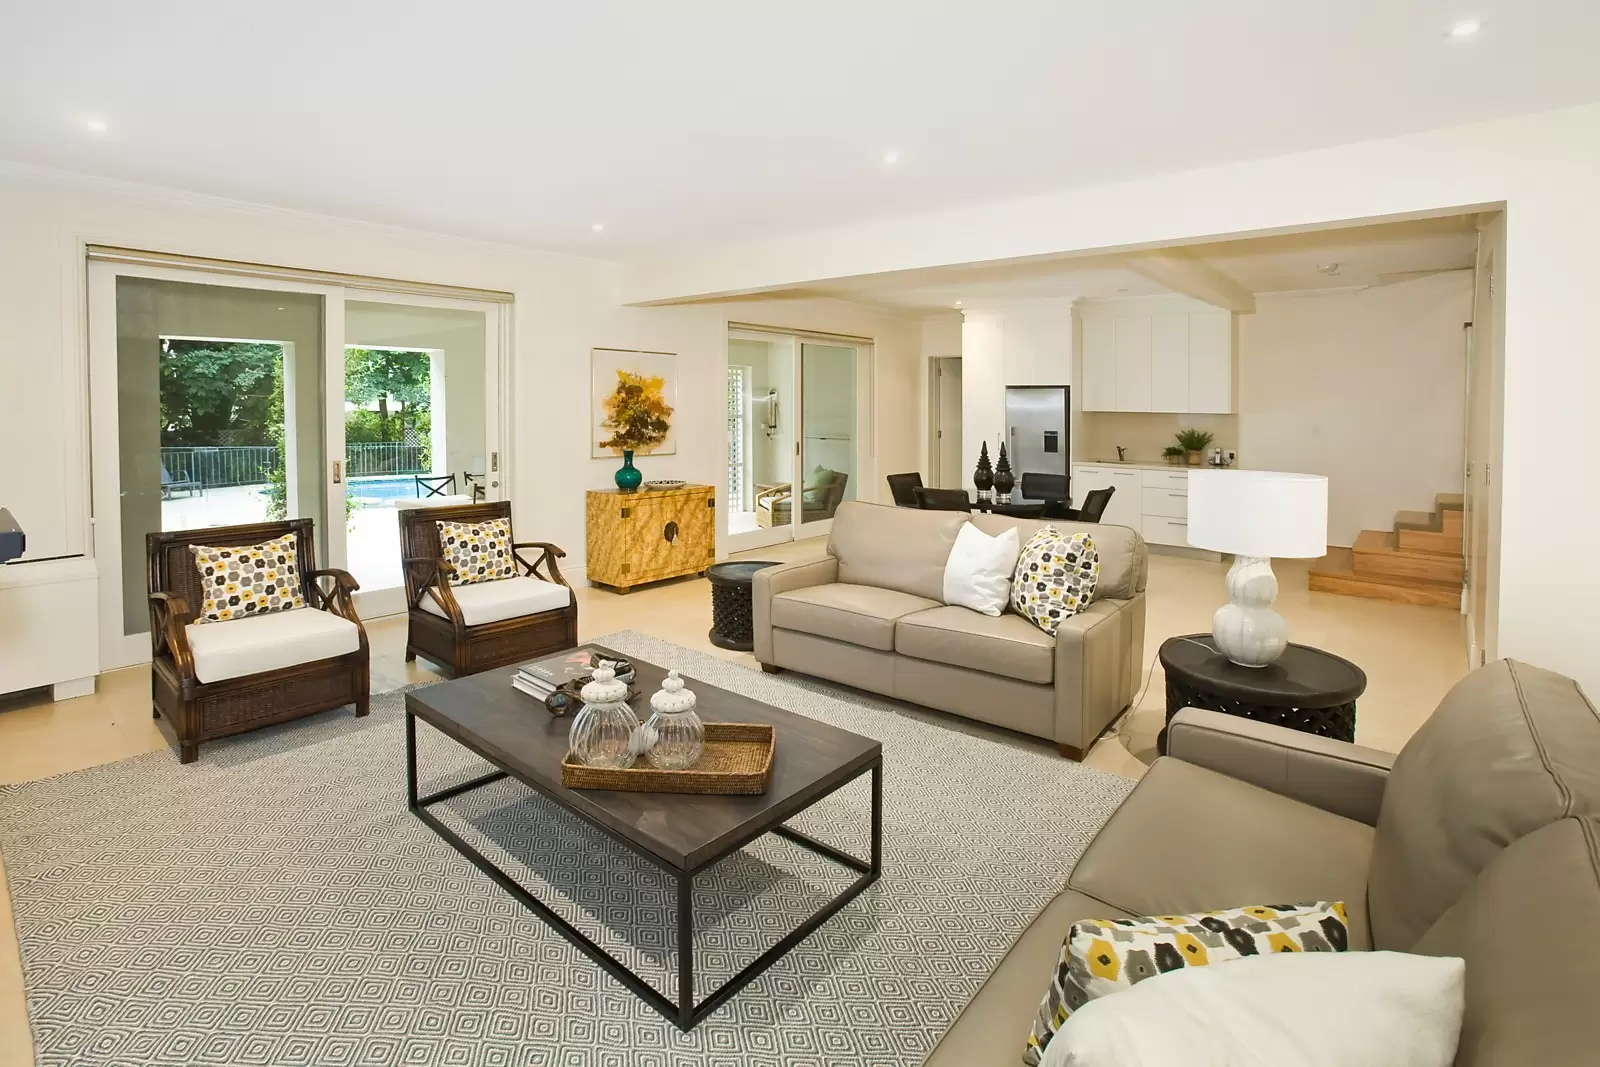 Photo #13: 5 Wallaroy Crescent, Woollahra - Sold by Sydney Sotheby's International Realty